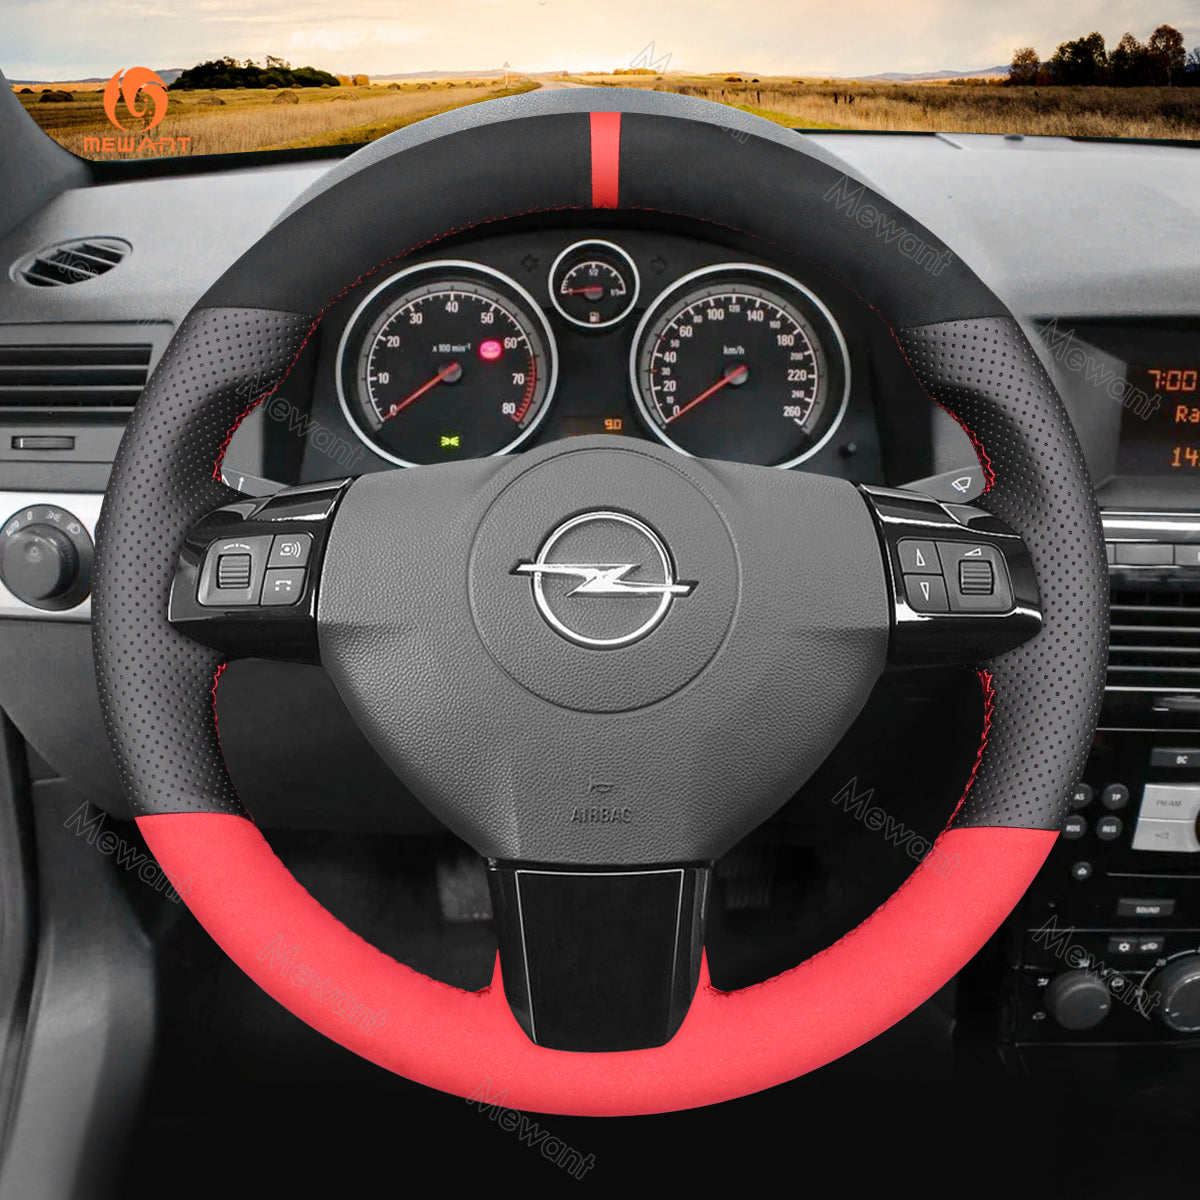 MEWANT Hand Stitch Black Leather Suede Car Steering Wheel Cover for Opel Vauxhall Astra Signum Vectra for Holden Astra